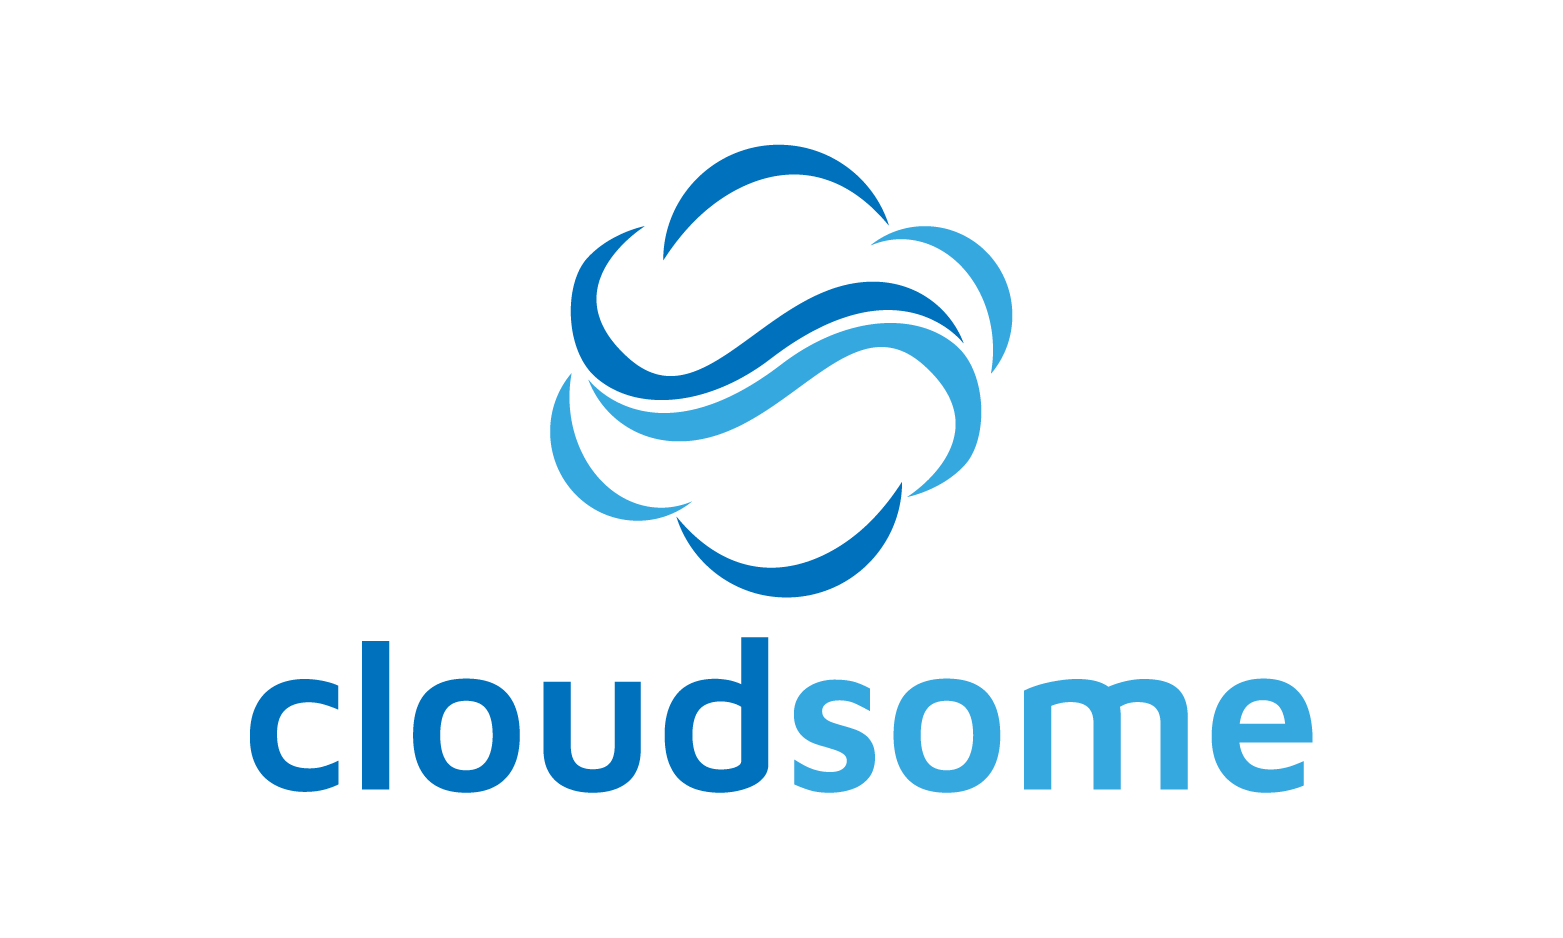 Cloudsome.com - Creative brandable domain for sale